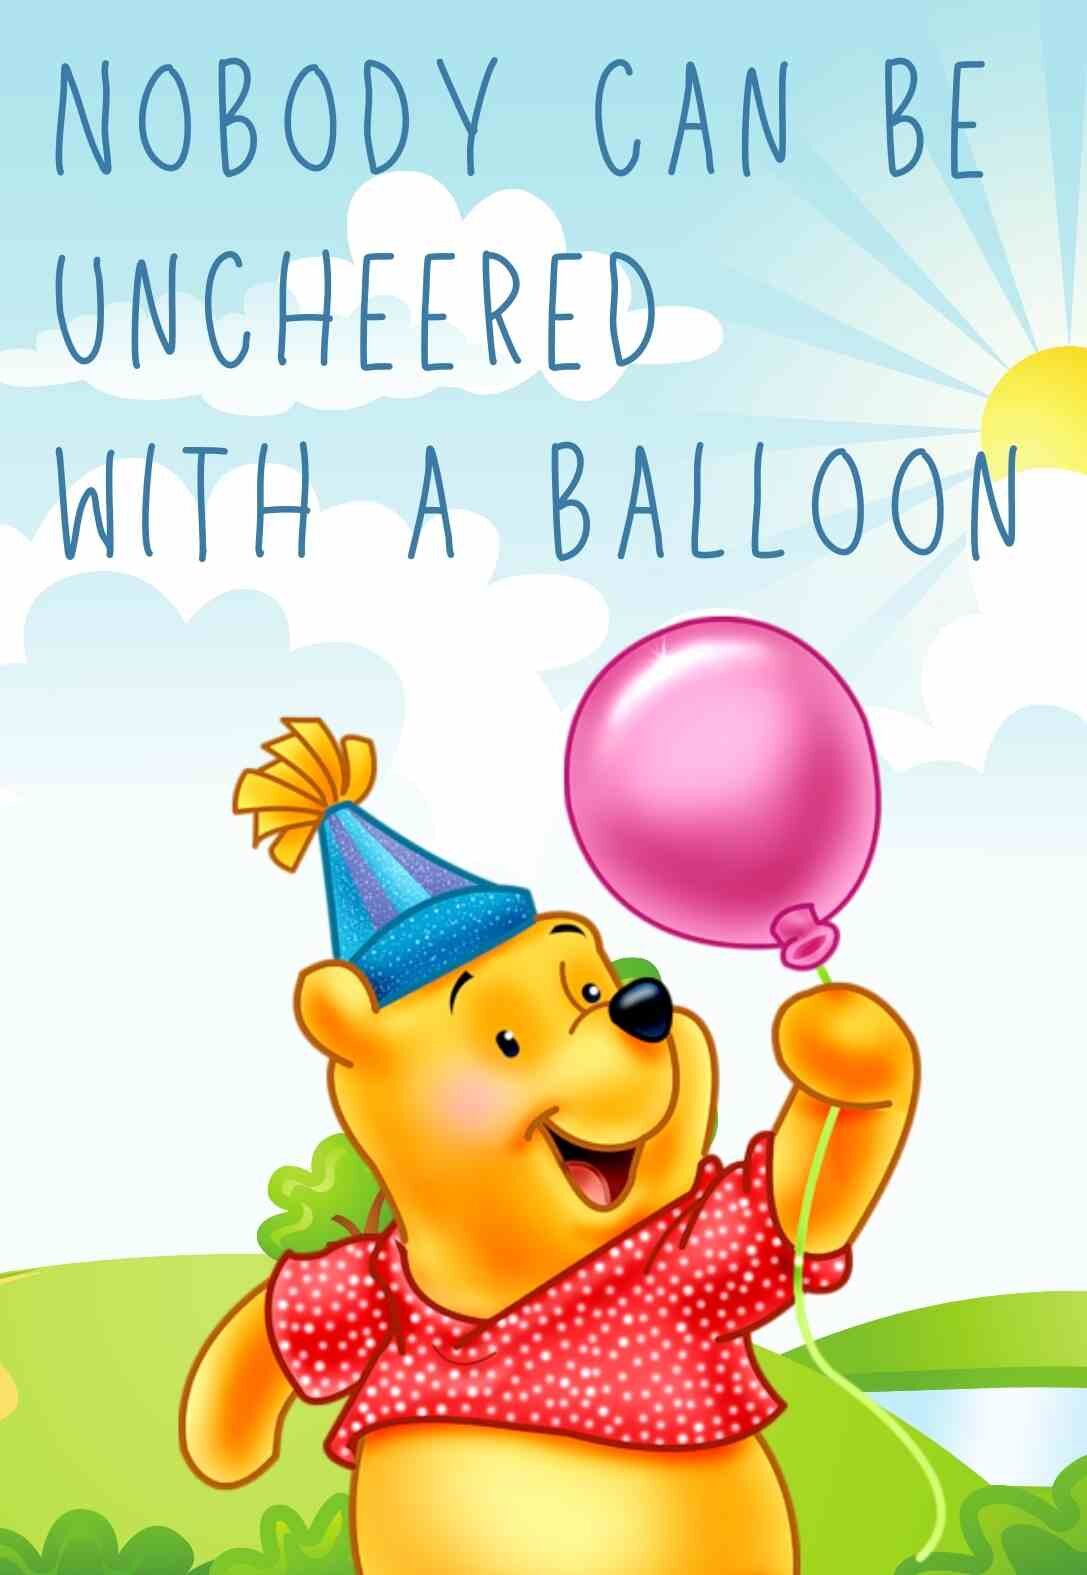 5 Awesome Pooh Bear Printable Birthday Cards + Messages — PRINTBIRTHDAY ...